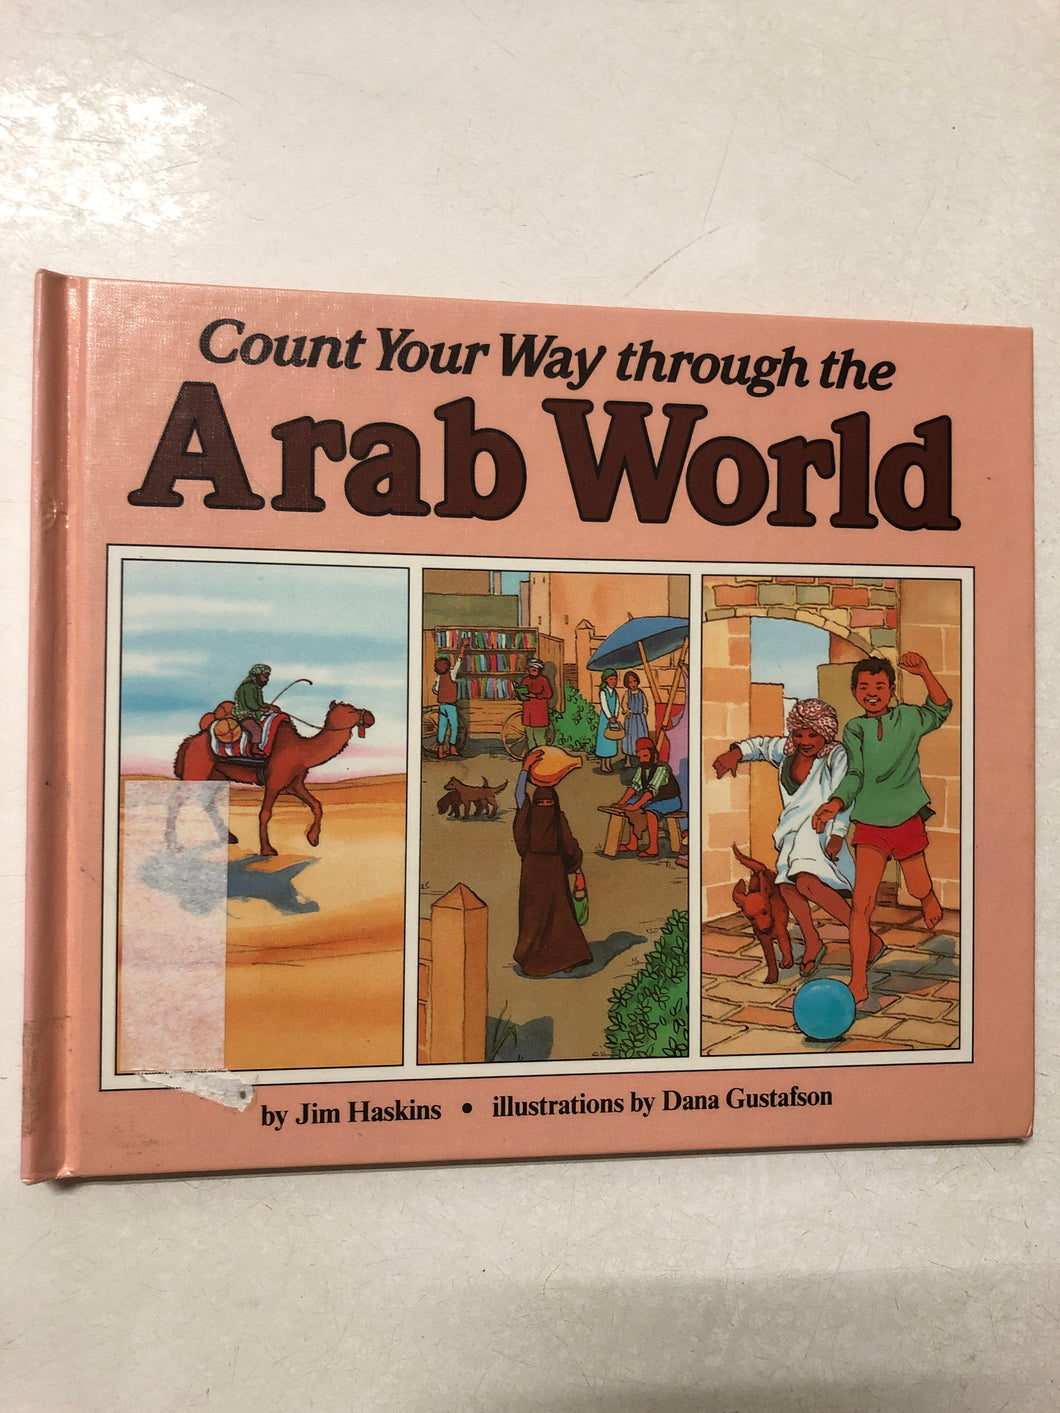 Count Your Way Through the Arab World - Slick Cat Books 